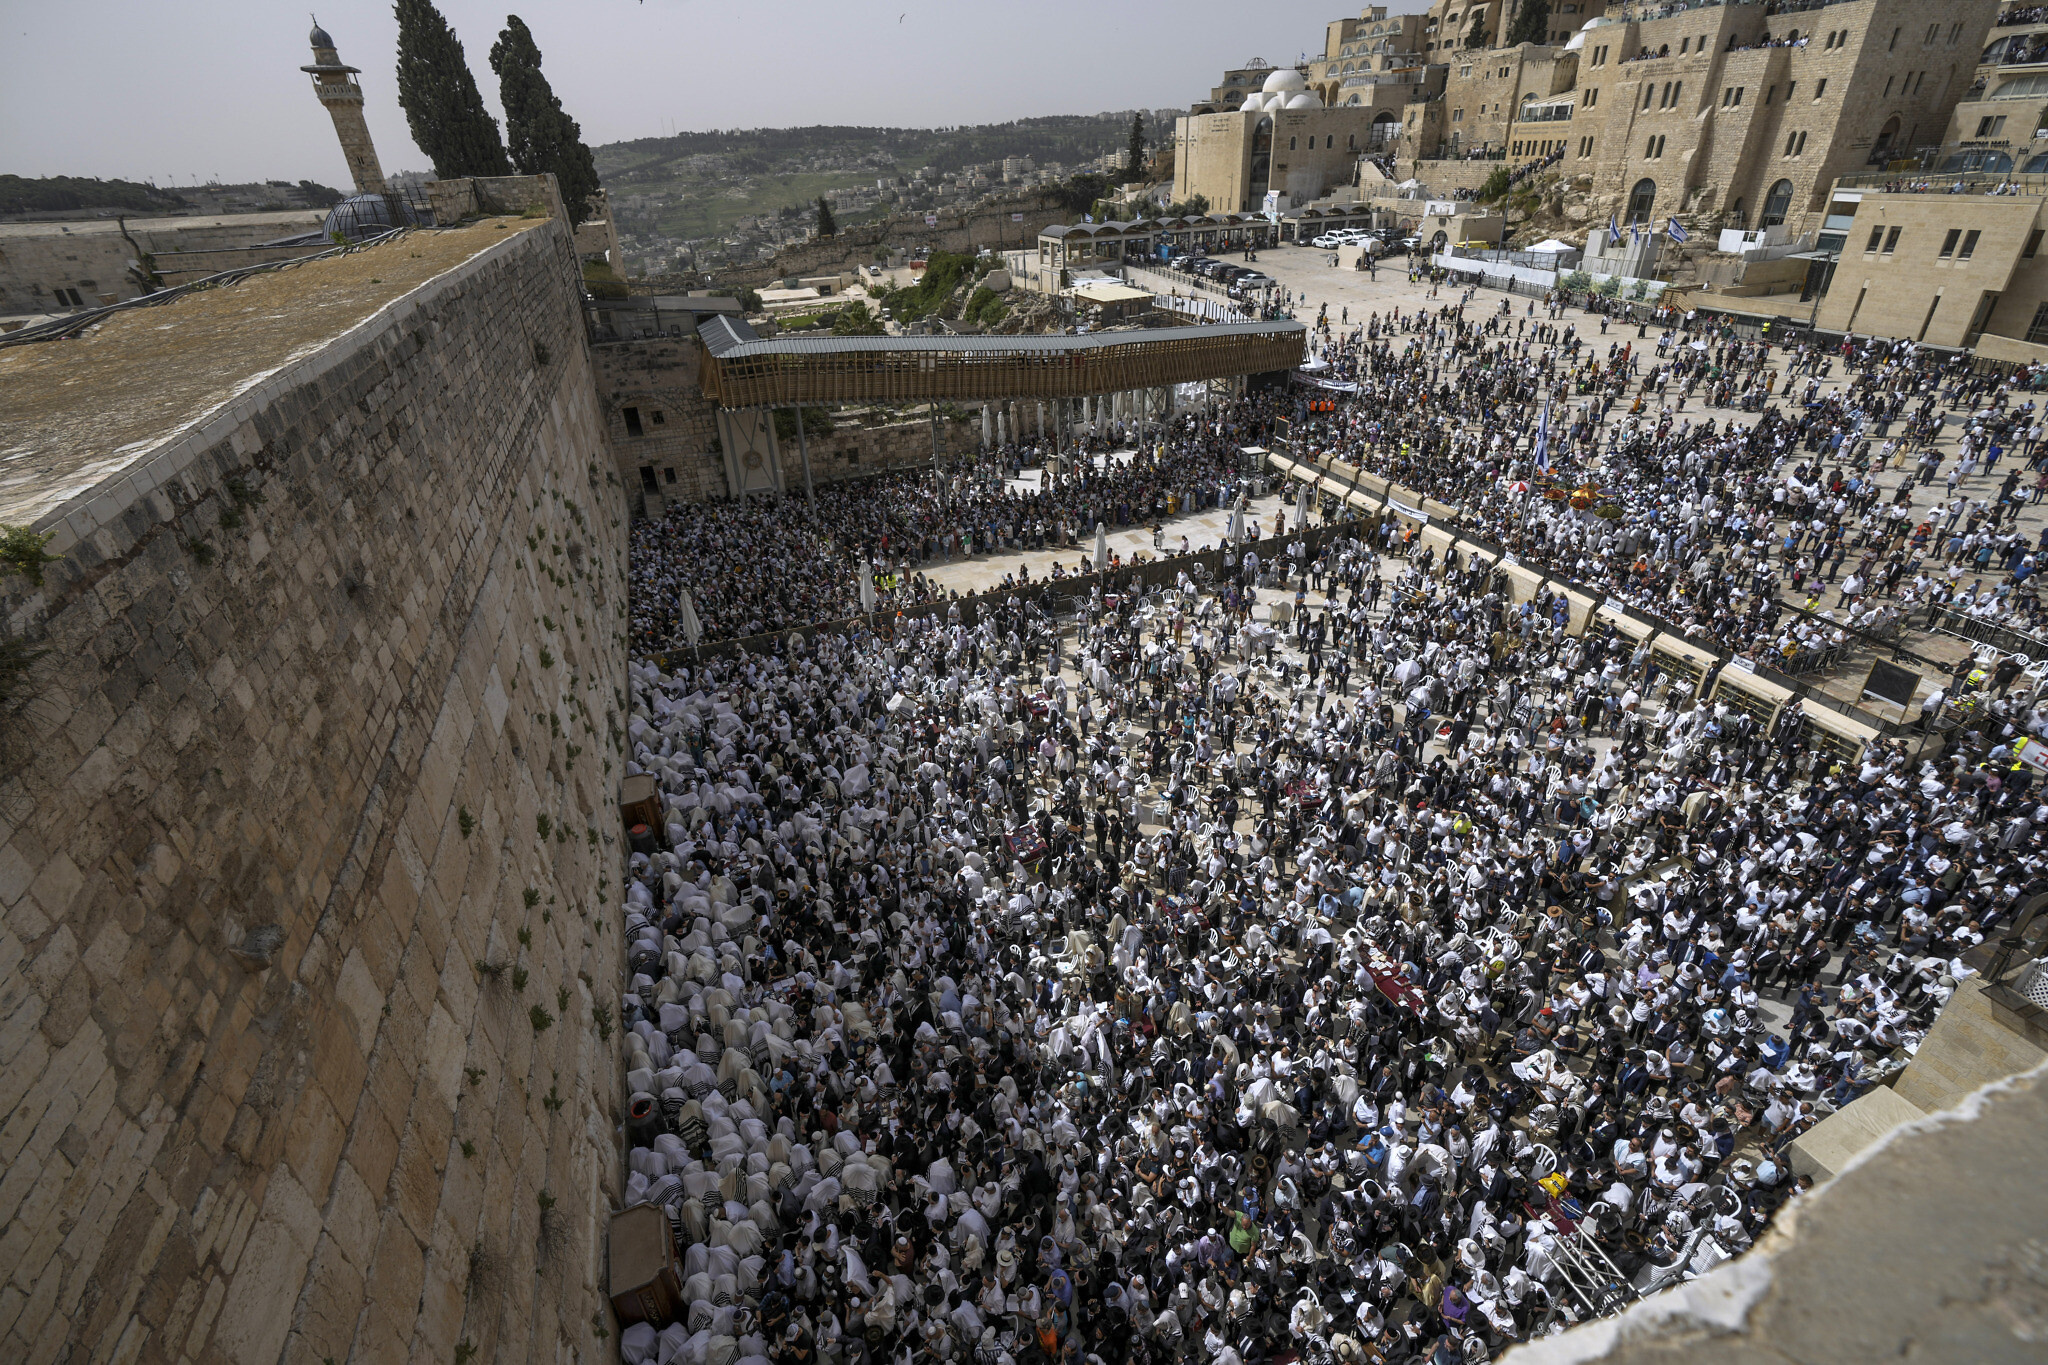 Western Wall, Passover prayer event, Low turnout, The Times of Israel, 2050x1370 HD Desktop